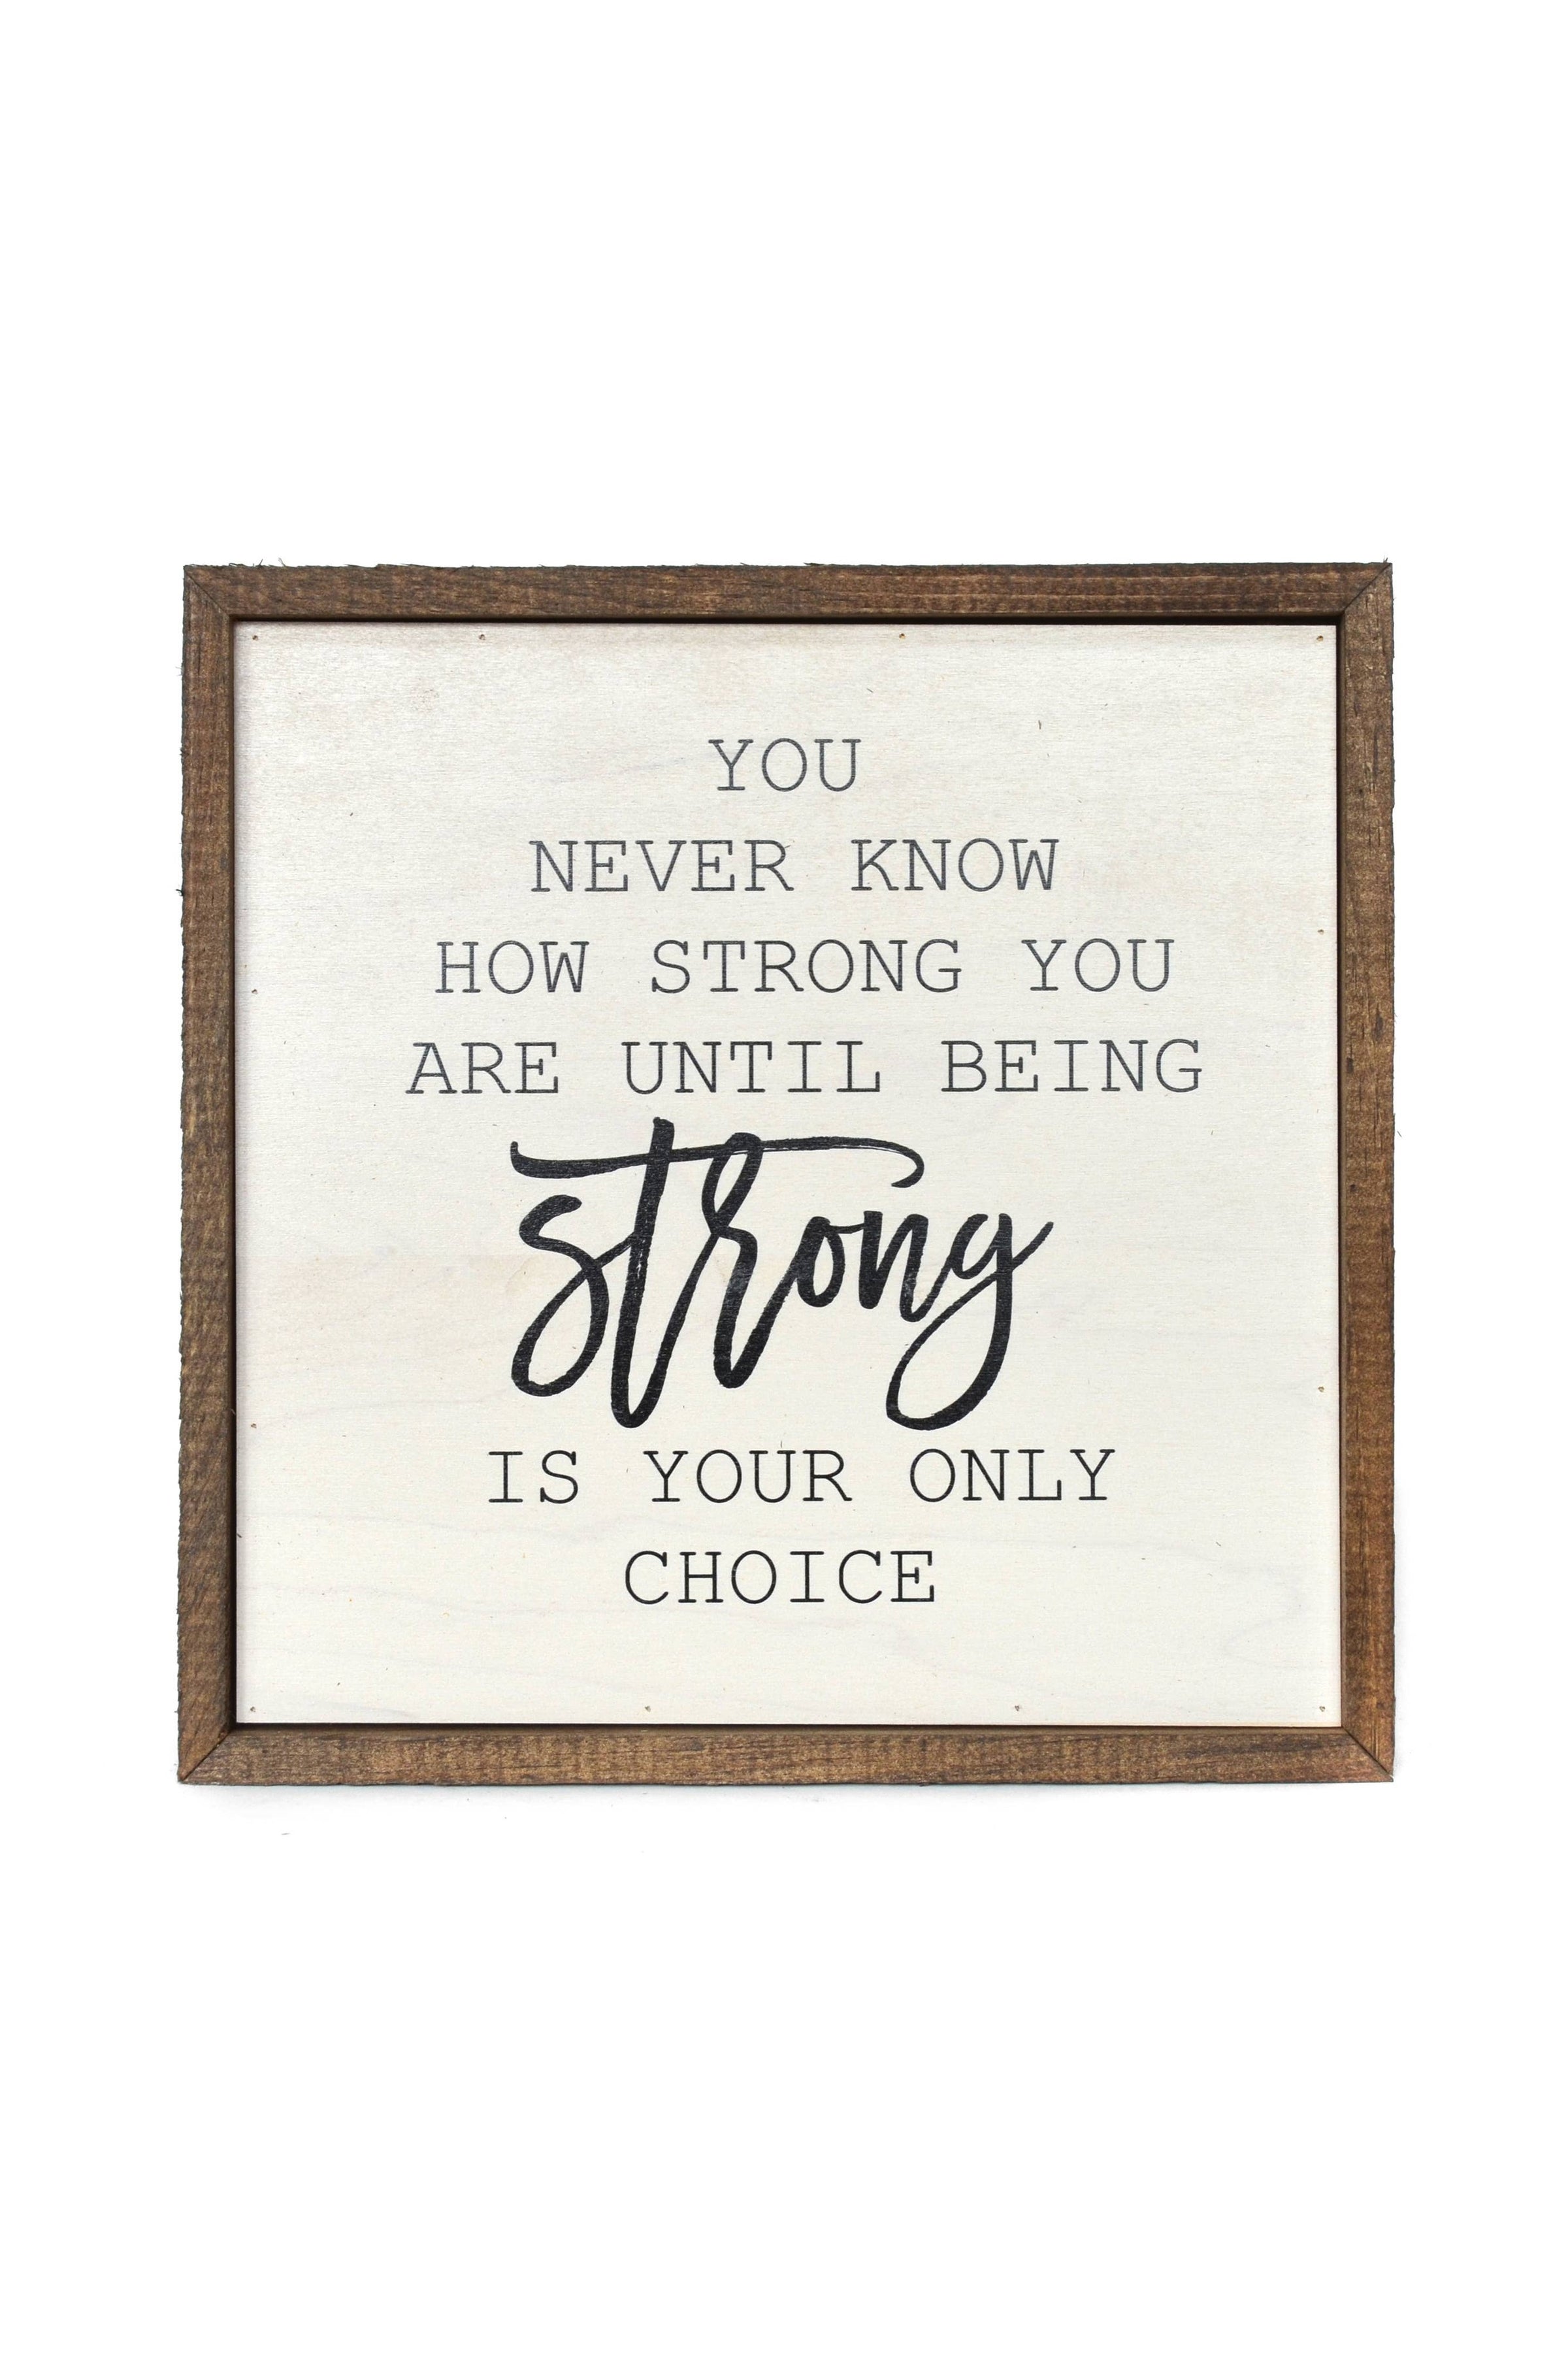 10x10 You Never Know How Strong You Are Wall Hanging